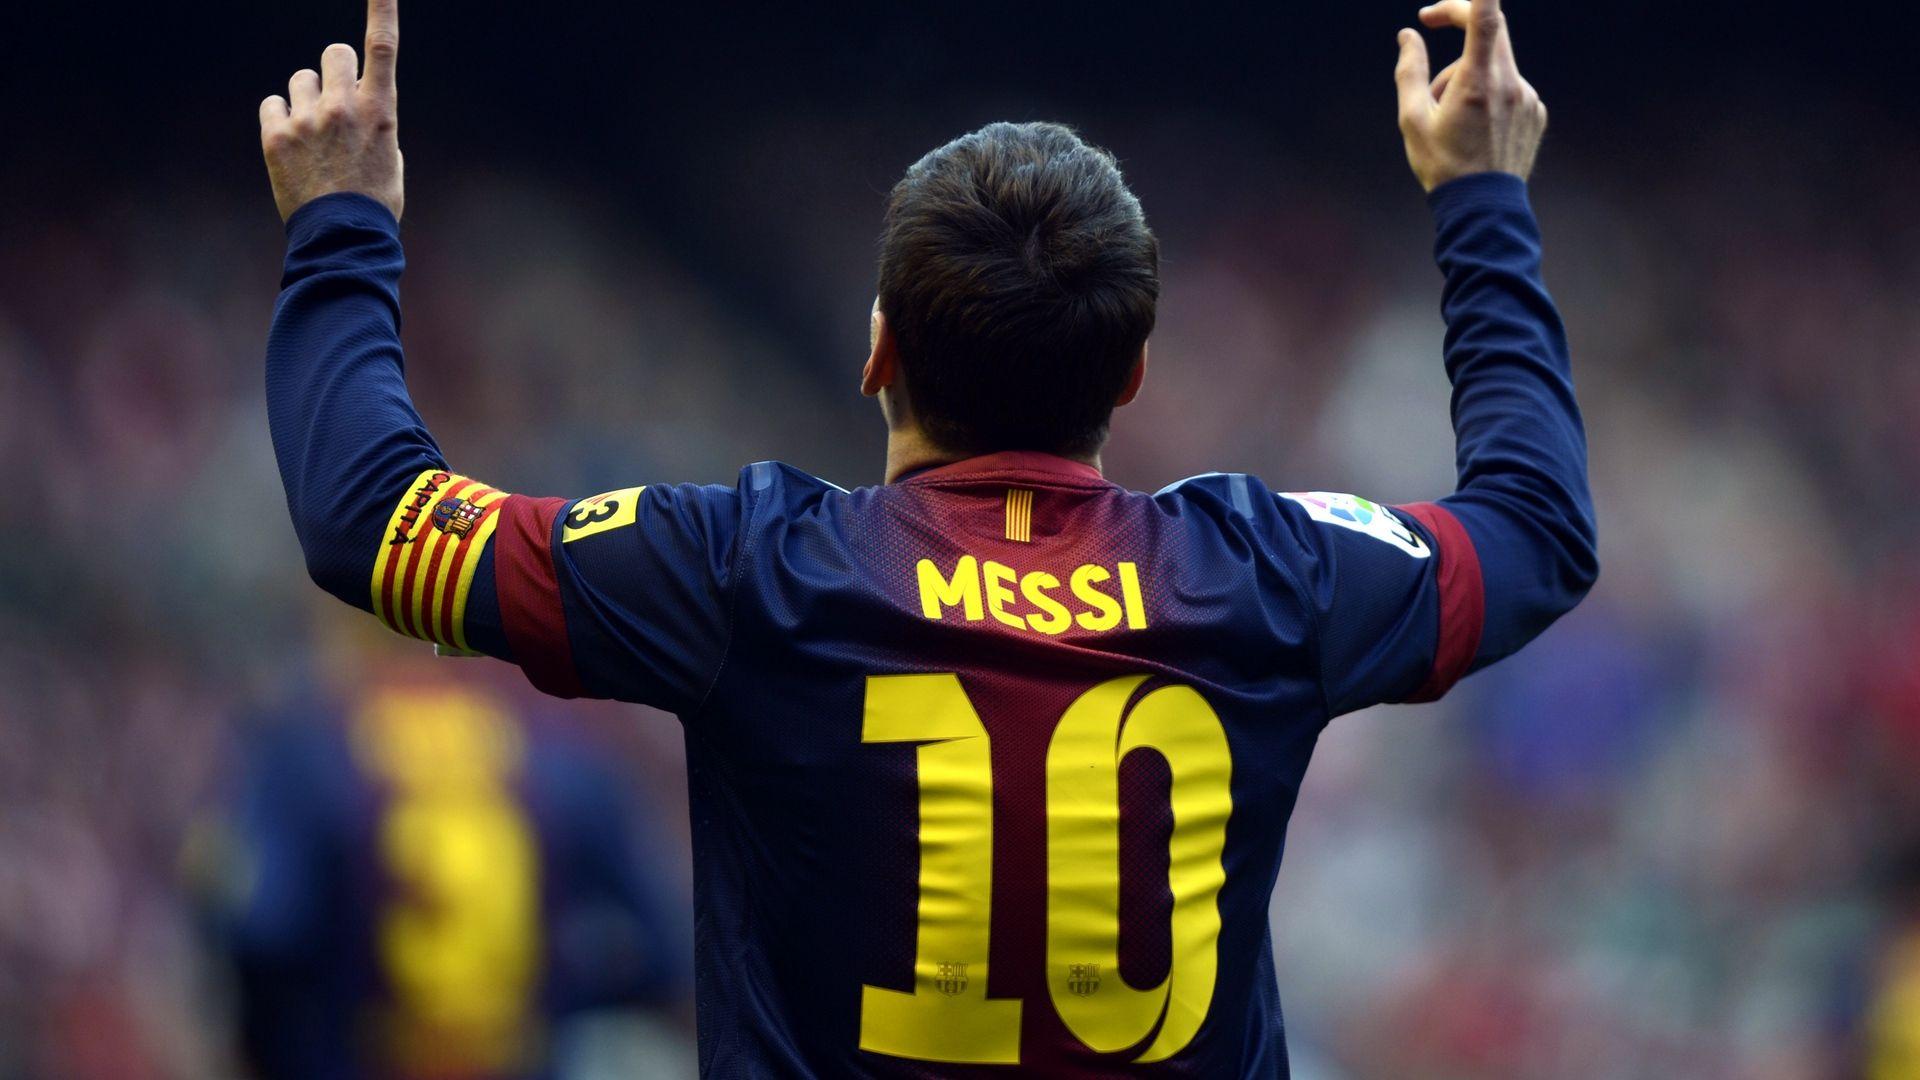 Download wallpaper 1920x1080 lionel messi, player, back, shirt full